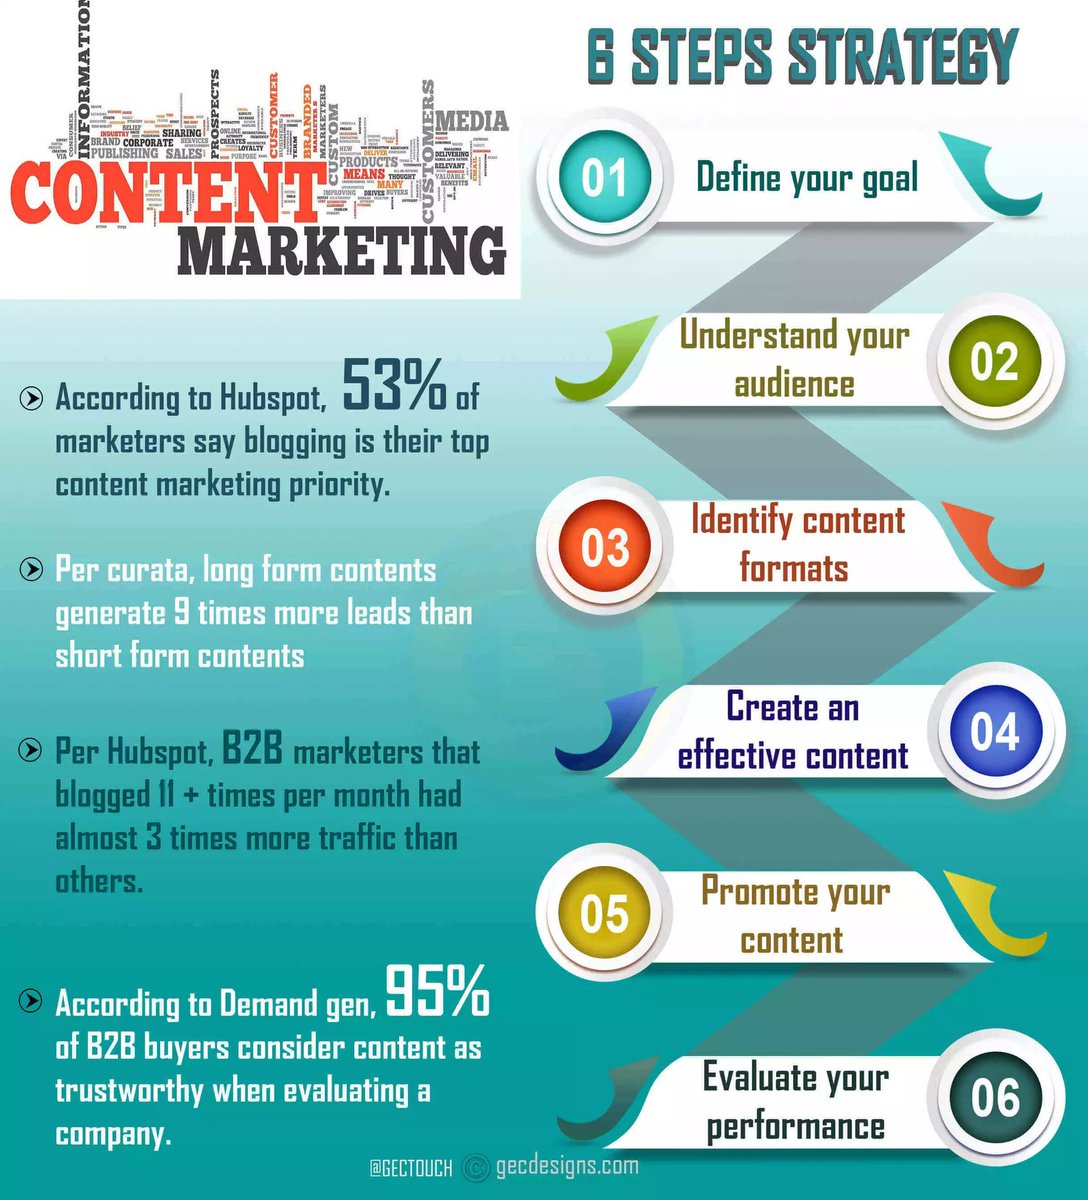 #Infographic: DYK, 93% of #B2B marketers are extremely committed to #contentmarketing!

#SocialMediaMarketing #DigitalMarketing #SocialMedia #Marketing #Branding #Business #SEO #OnlineMarketing #Instagram #MarketingStrategy #B2BMarketing #LinkedInMarketing